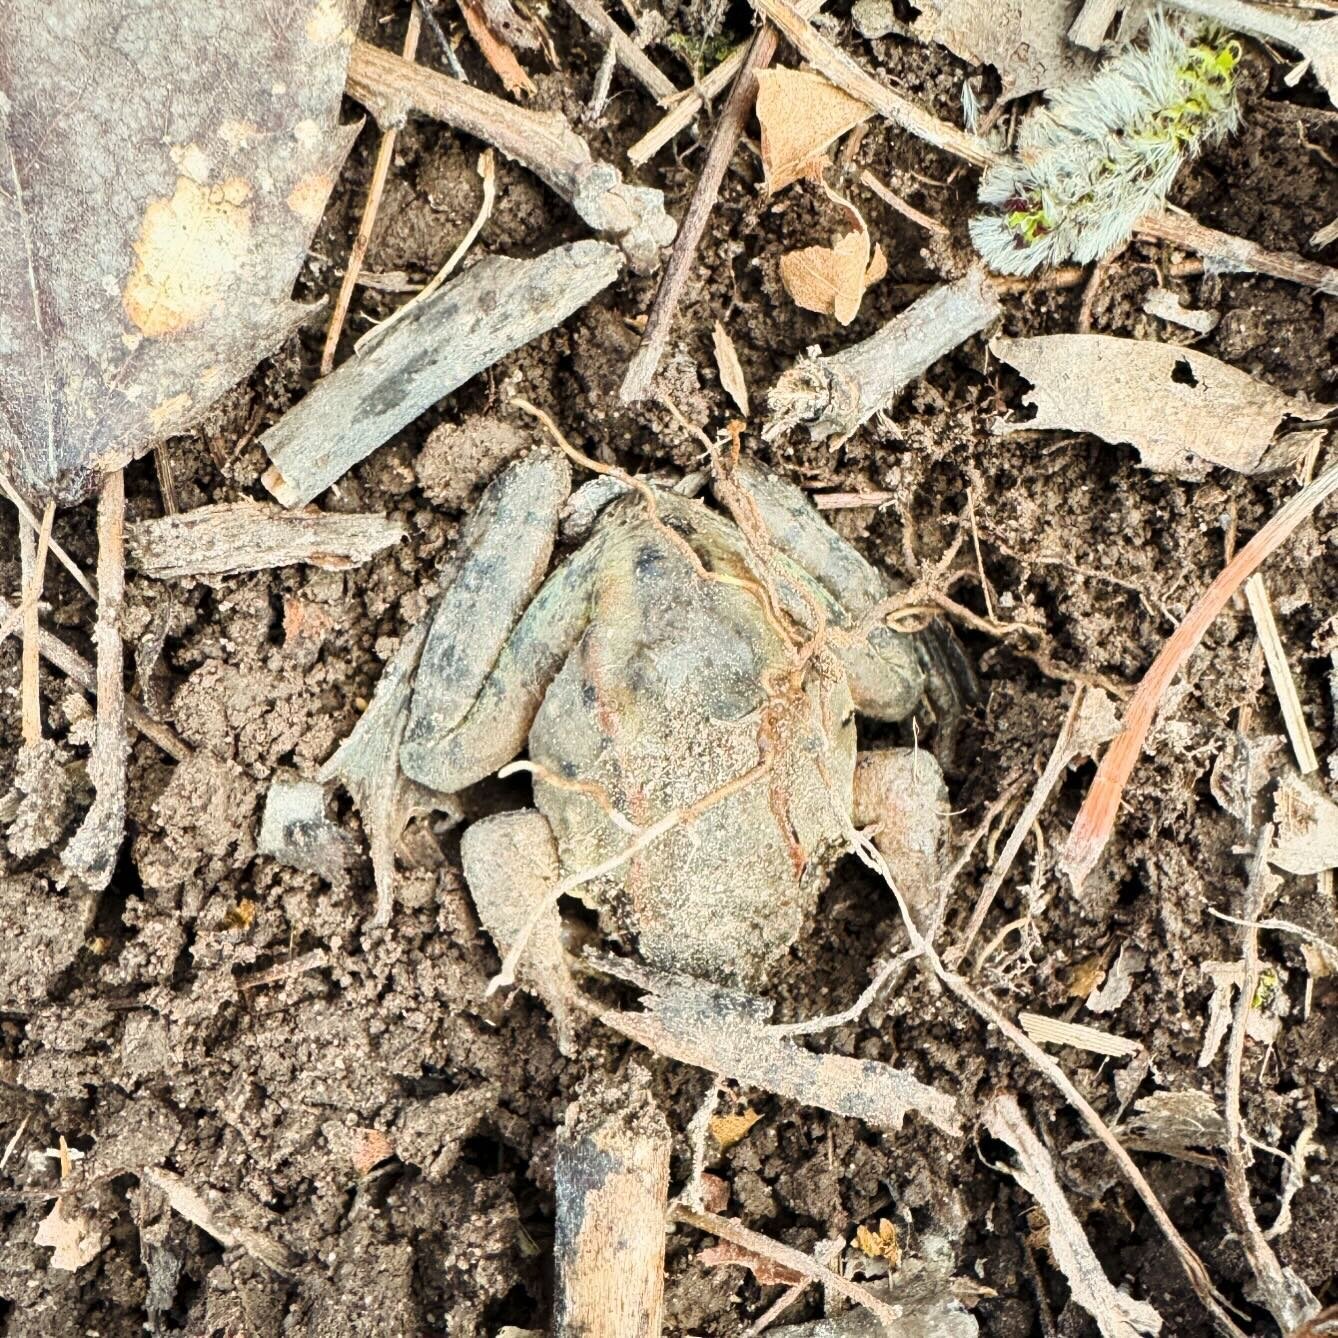 &ldquo;Hyla&rdquo; the dog finds another wood frog sleeping under the leaves. Observation added to @herpmapper 

#herpetology 
#herping
#frogs 
#frogsofinstagram